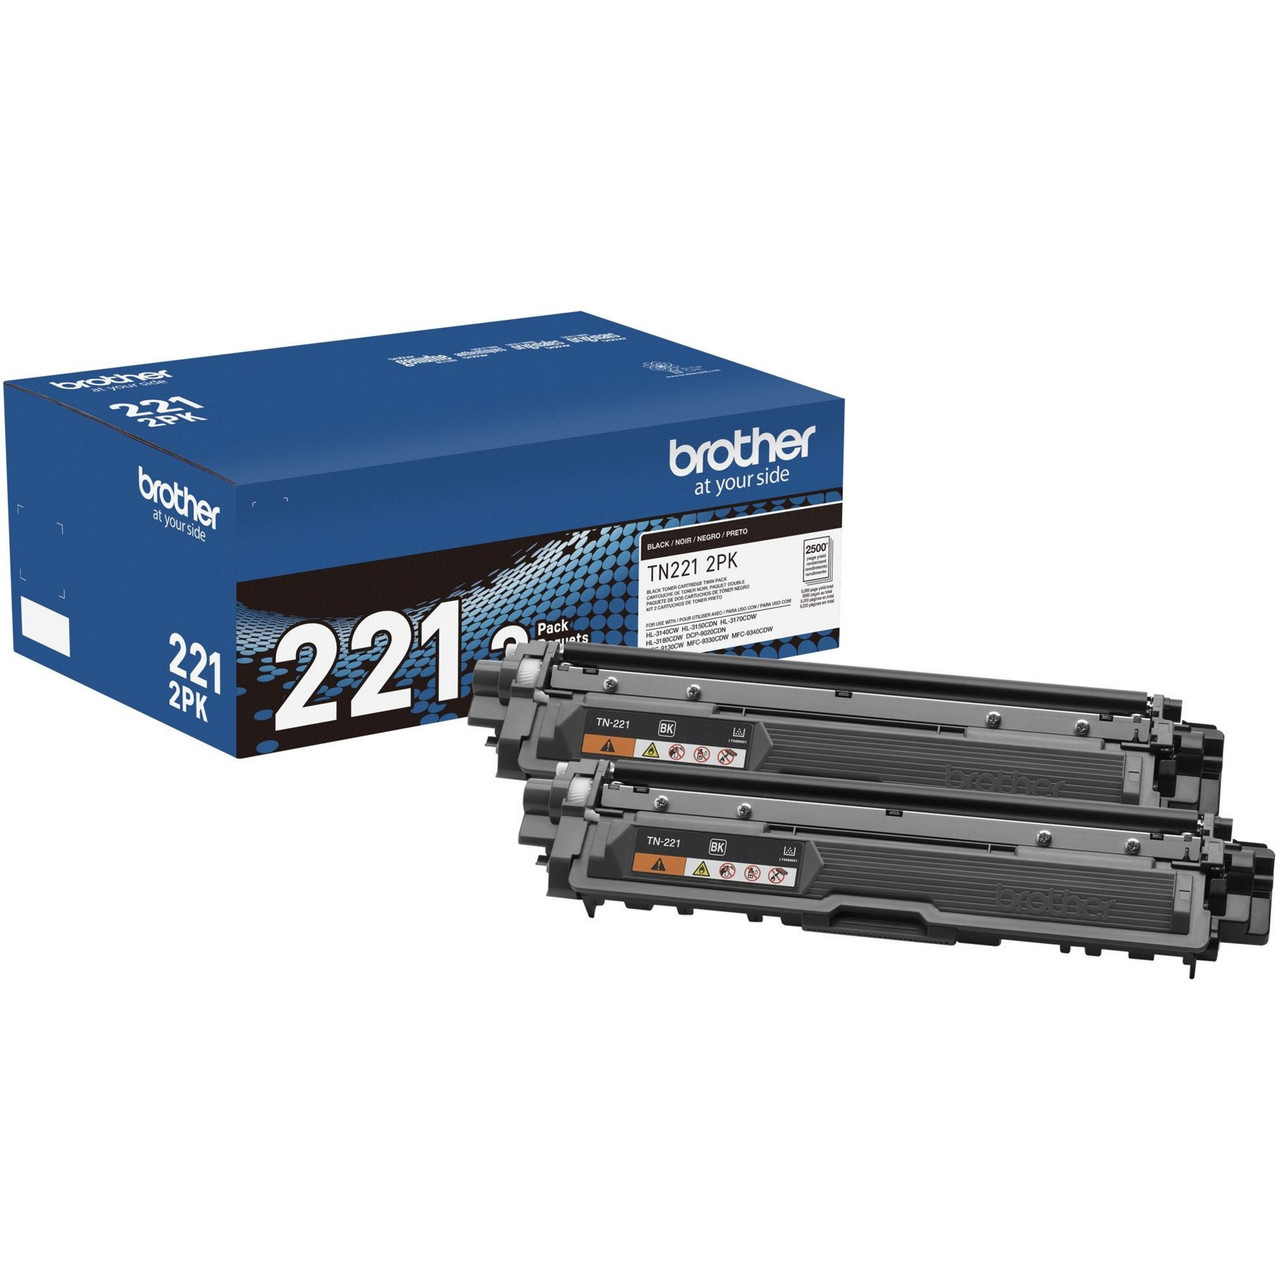 Brother DCP-9020 Toner Cartridges